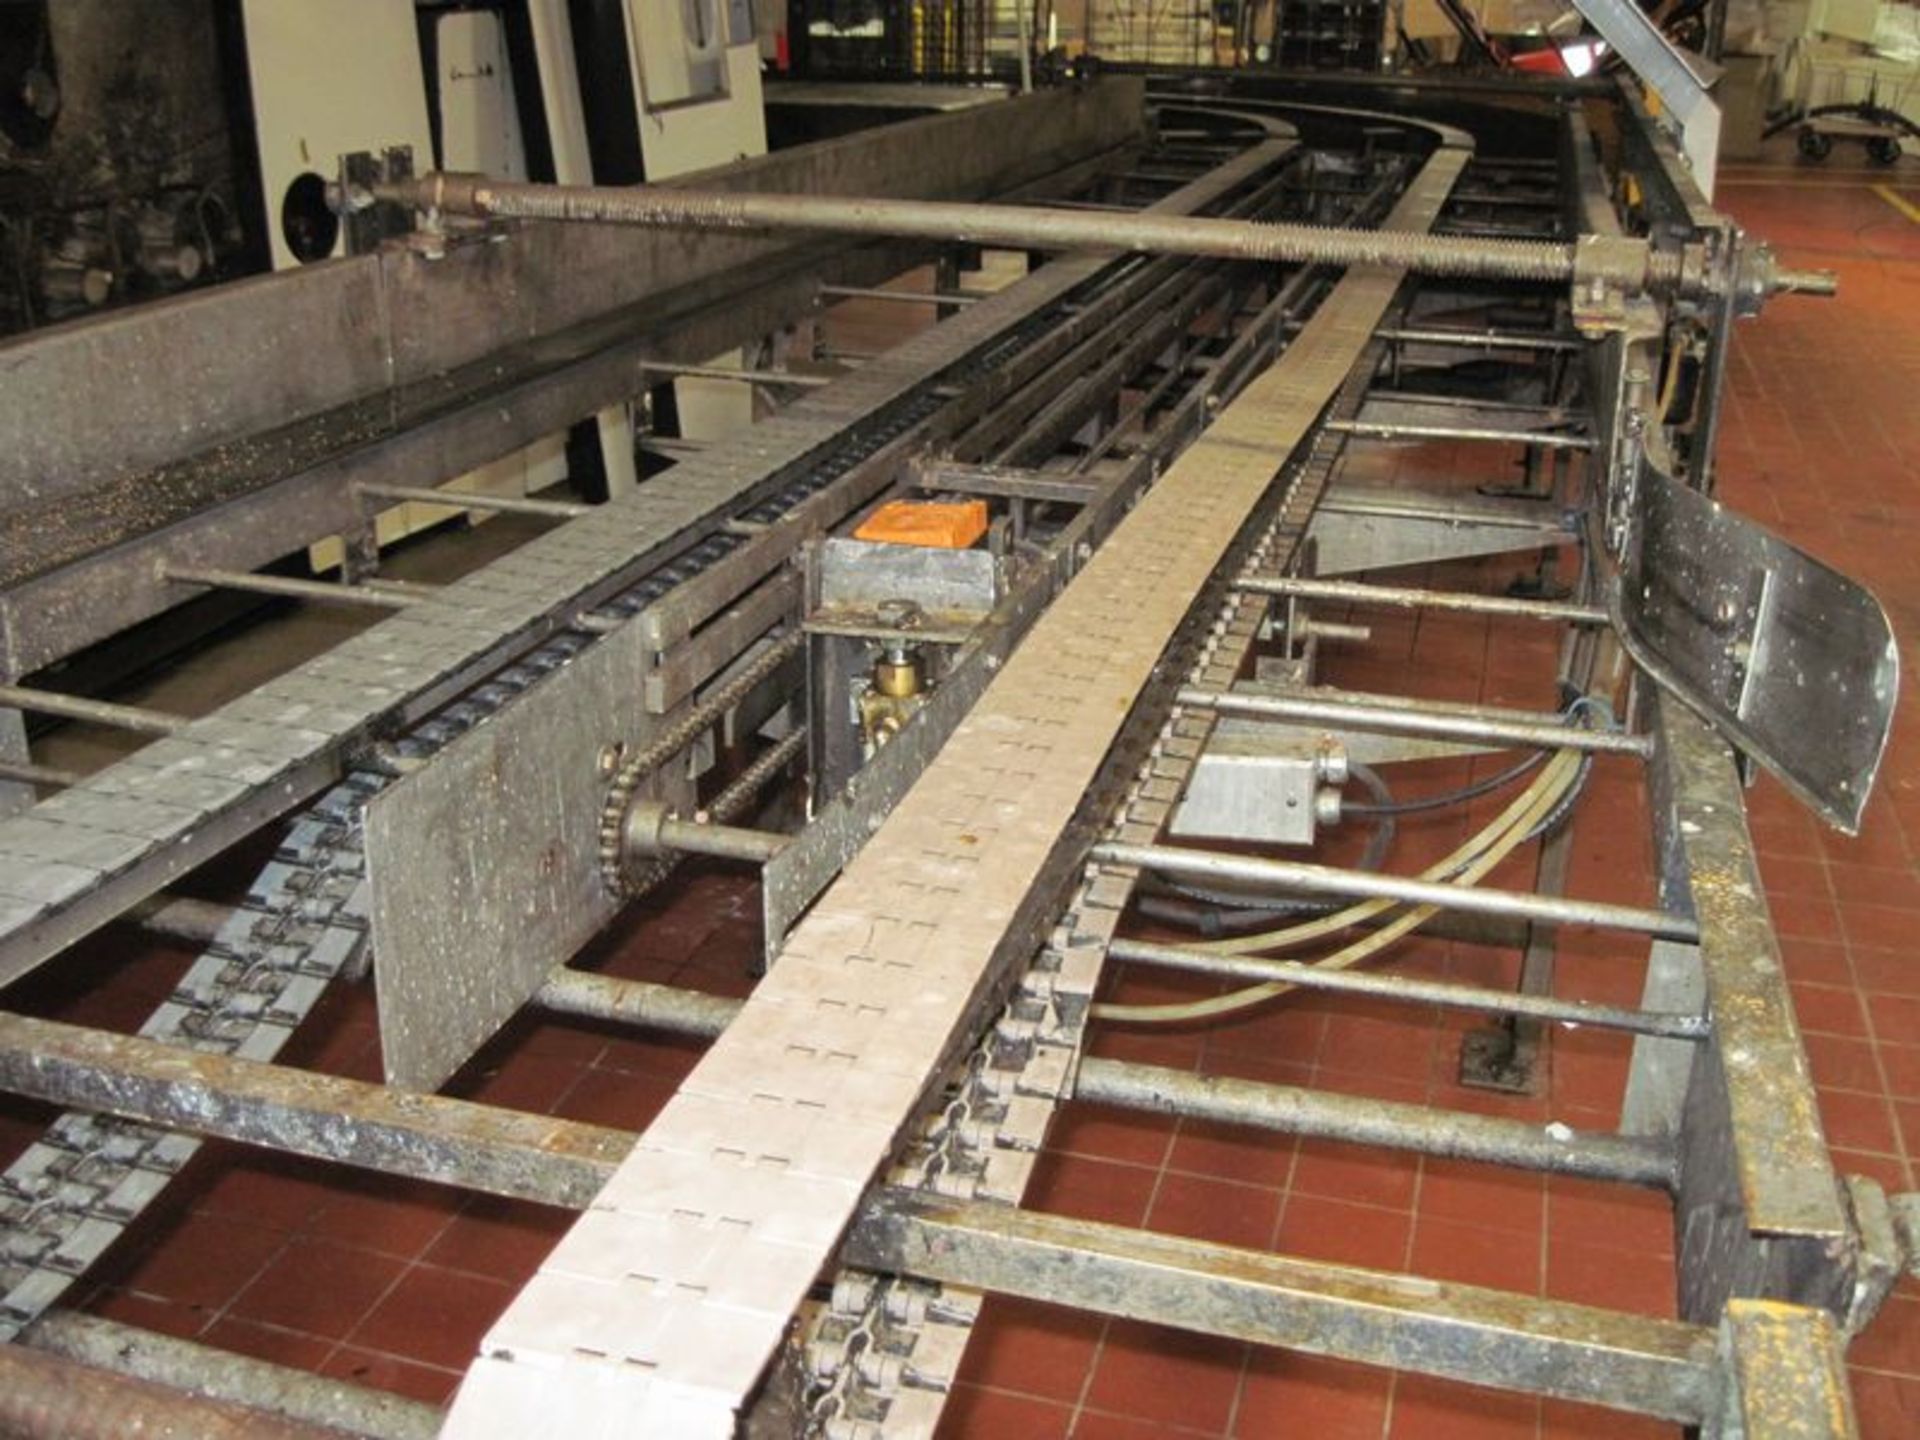 Dual plastic table top belt conveyor. (2) Approximate 3" wide x 15' long belts. With approximate 2hp